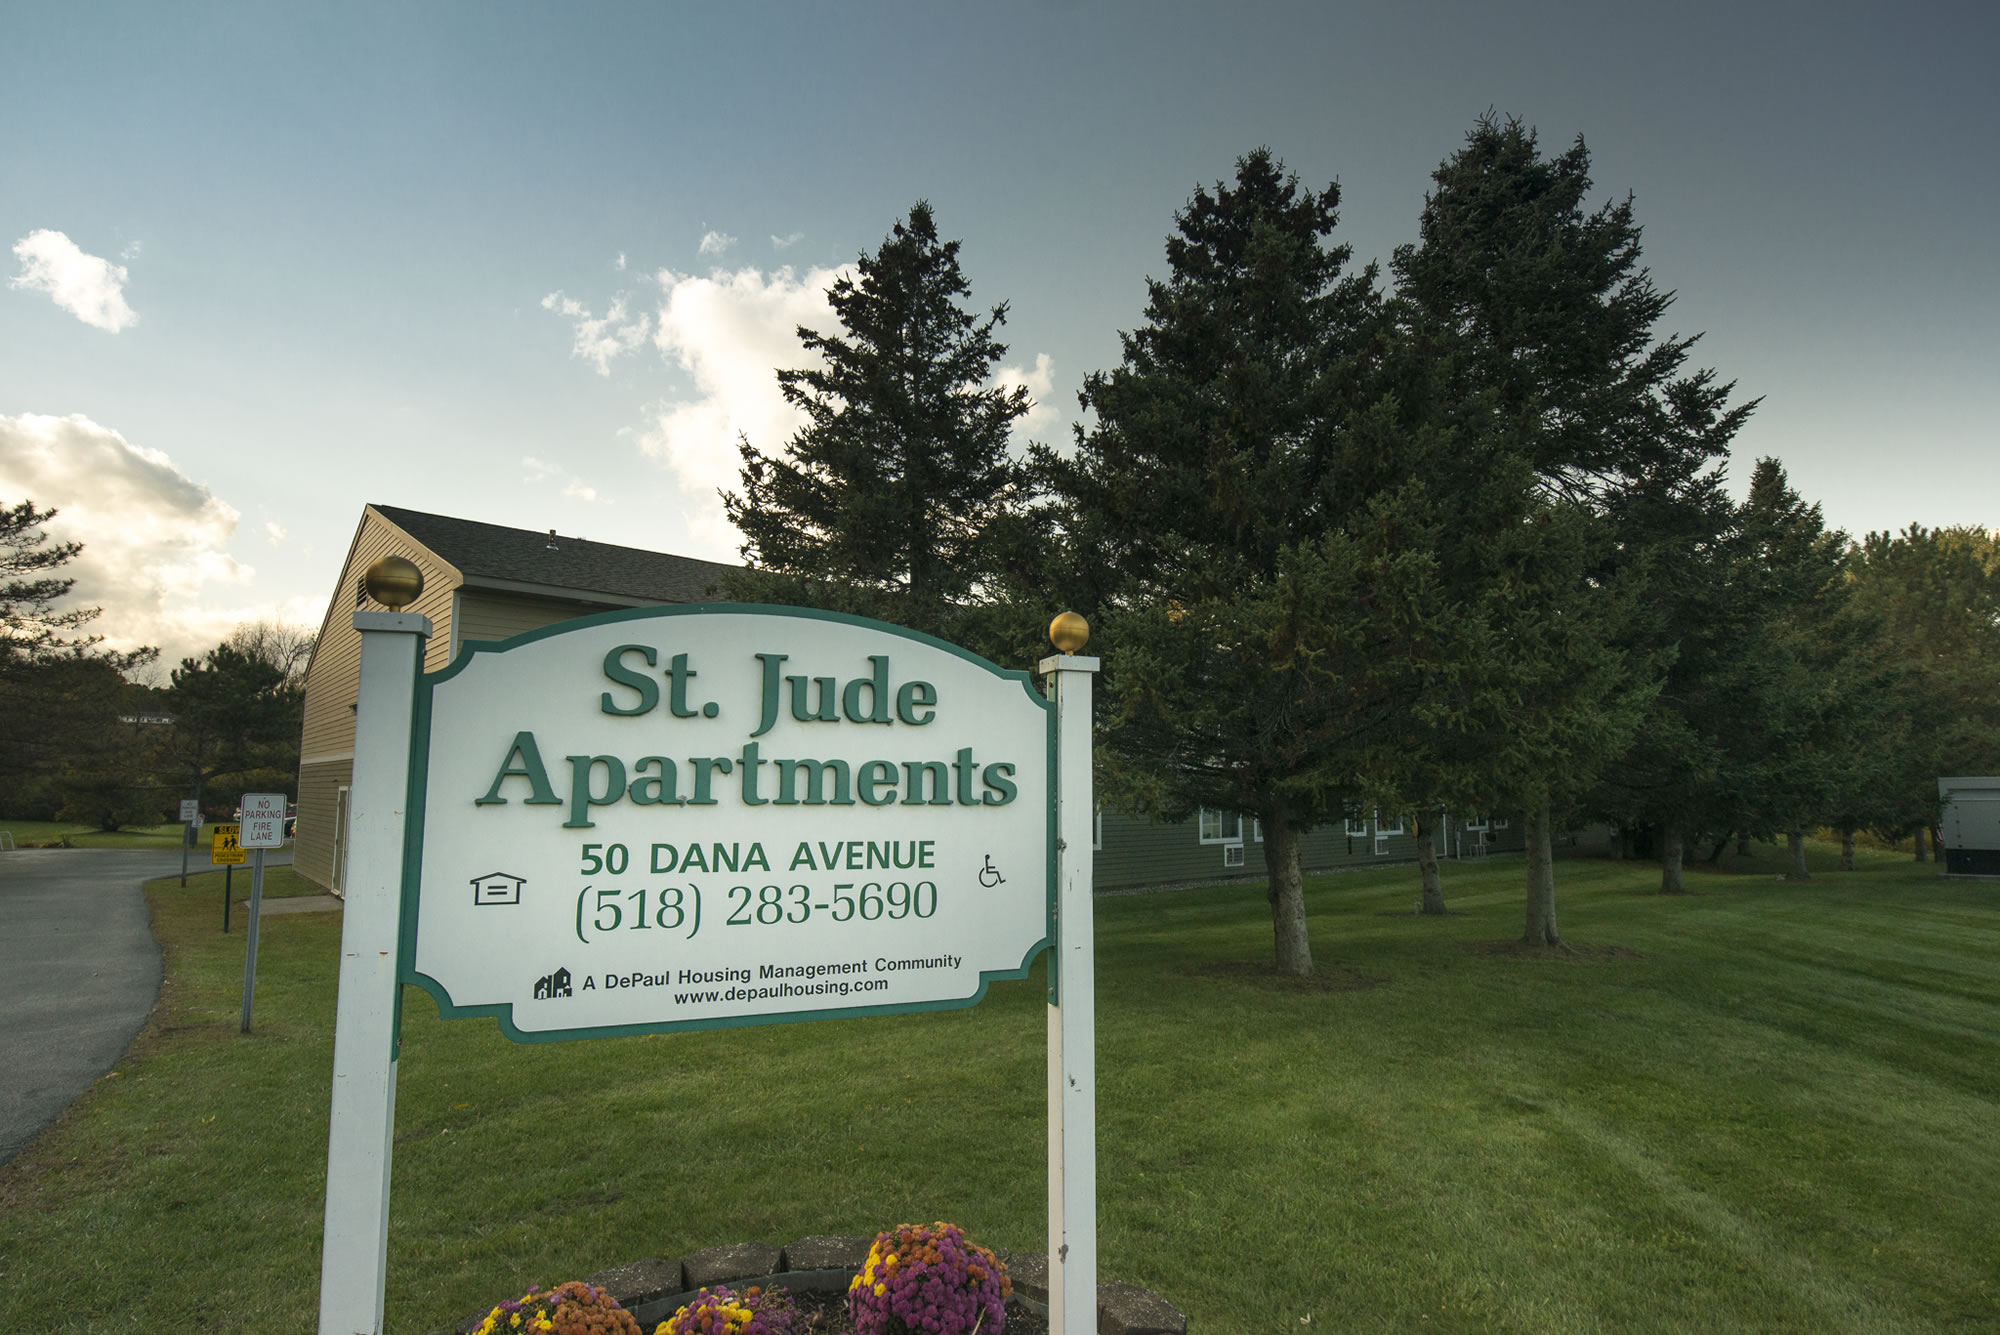 ST. JUDE APARTMENTS